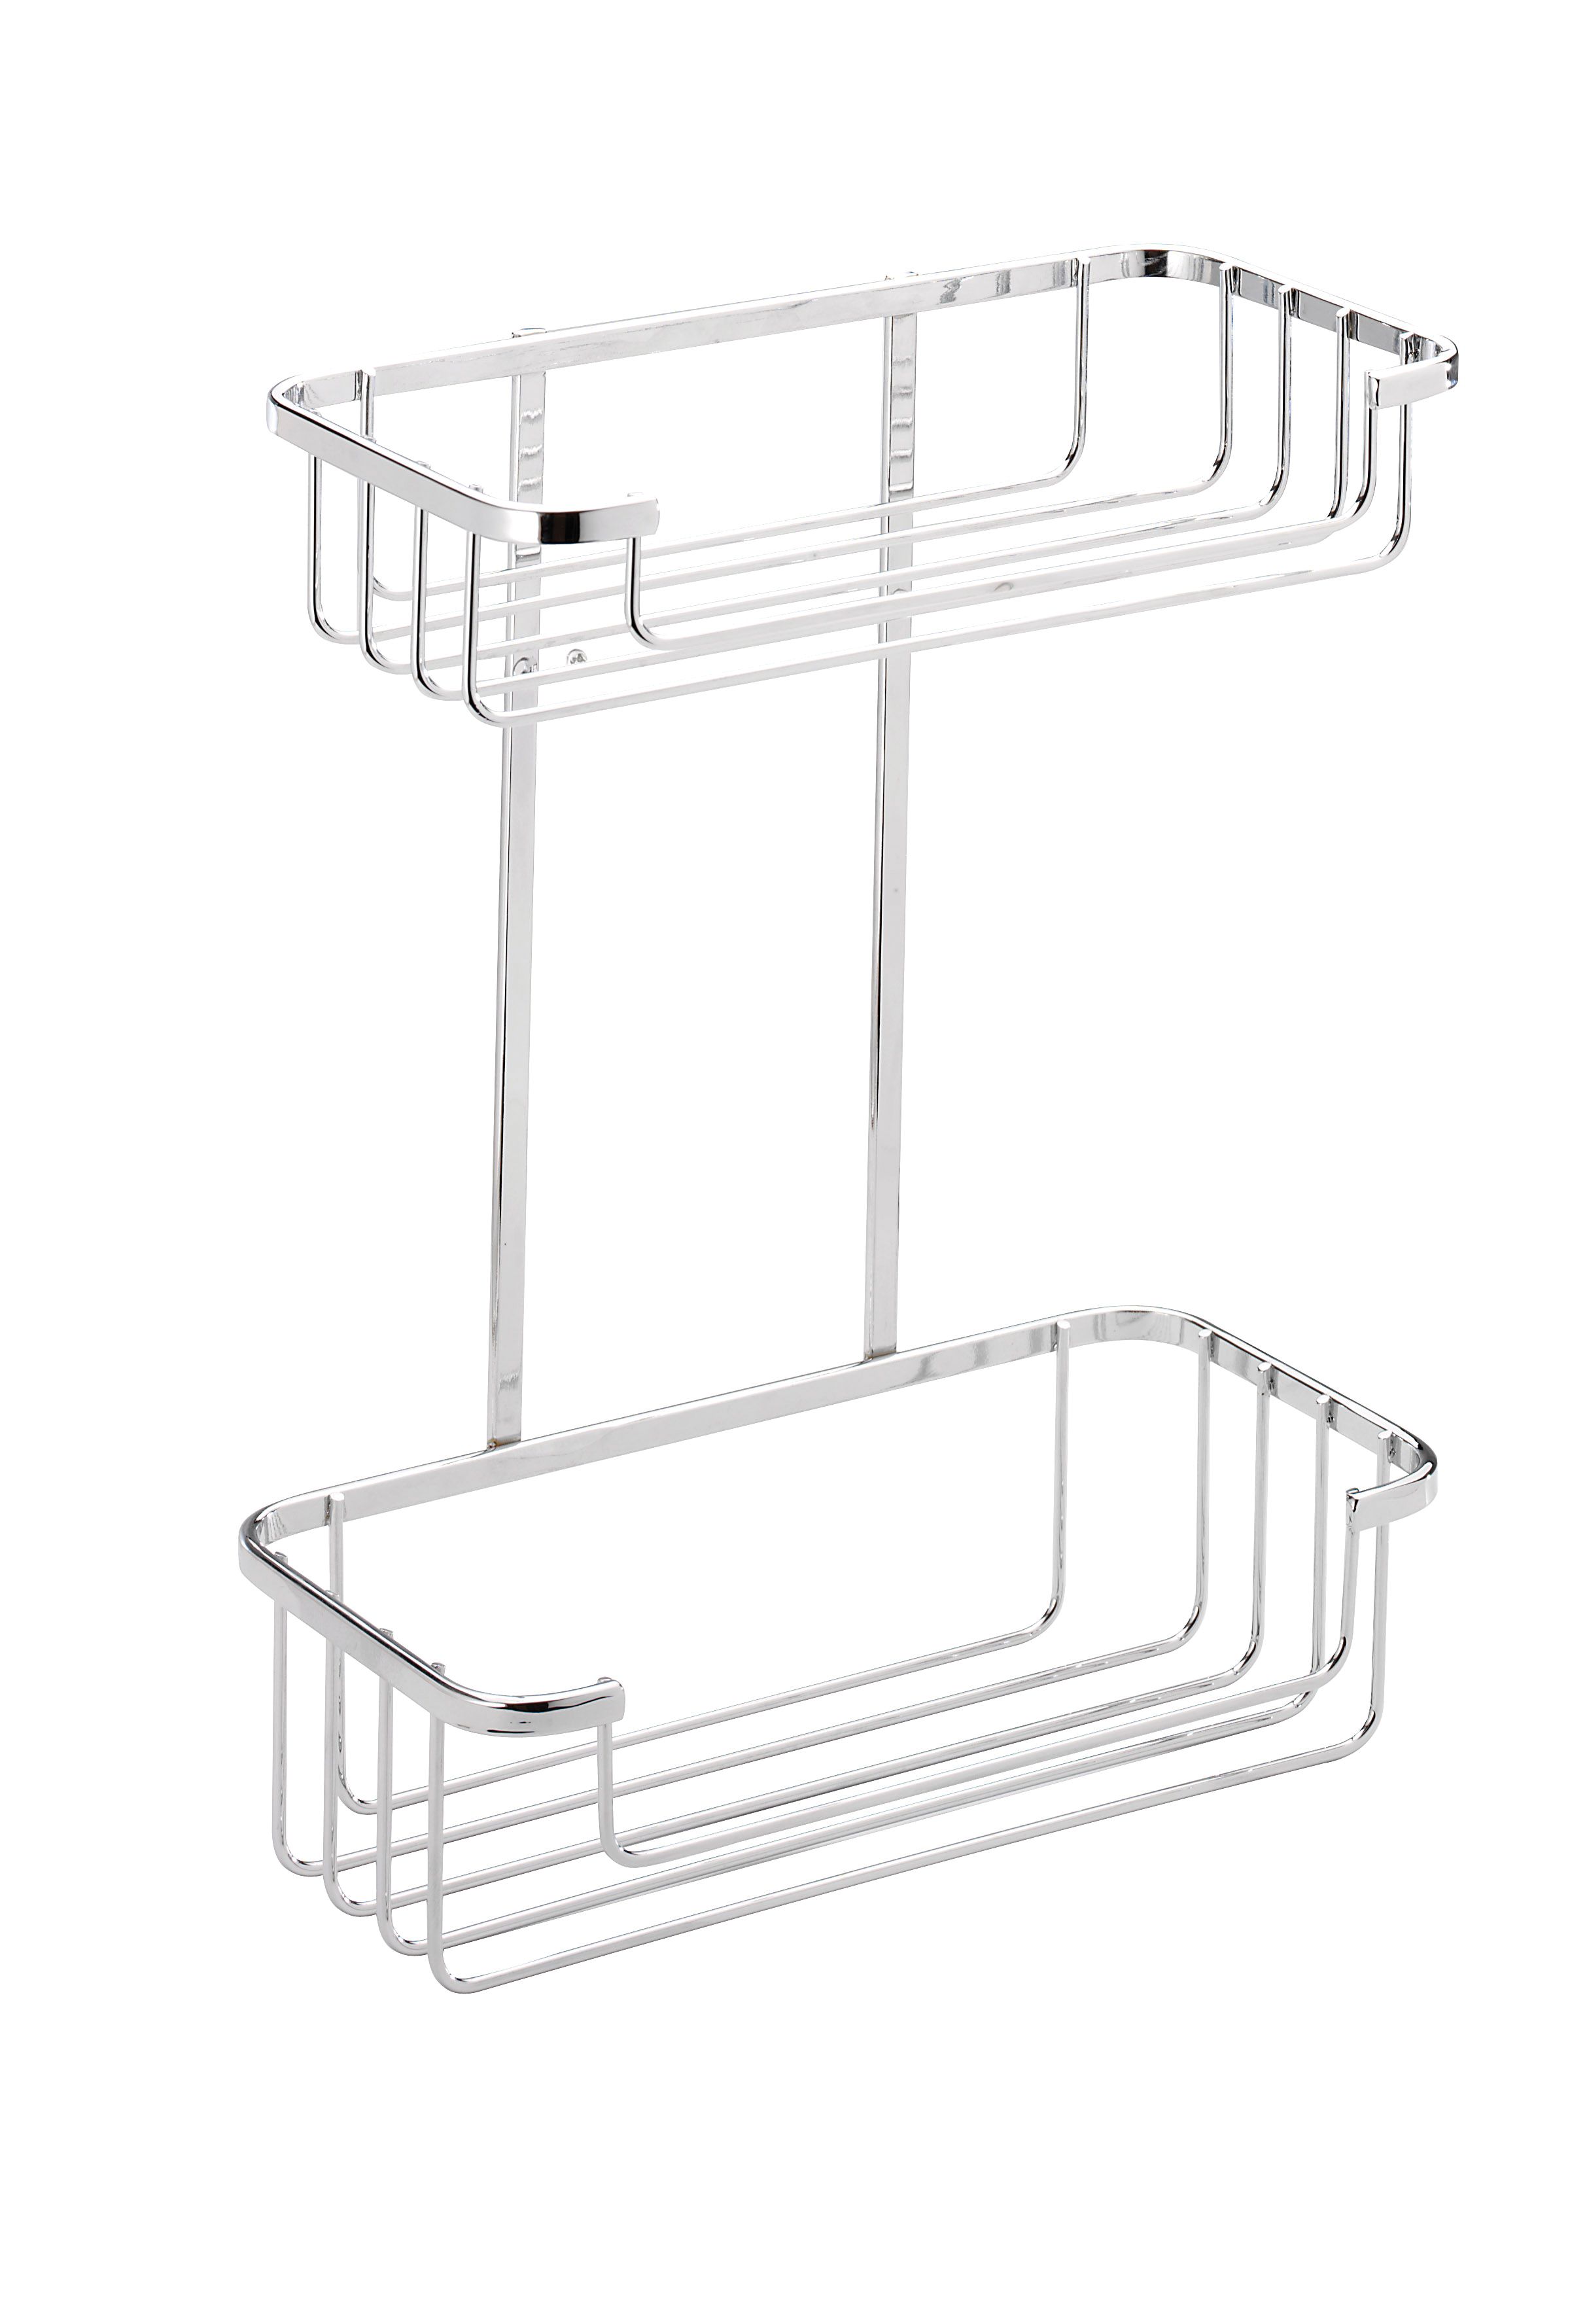 Image of Croydex Rust Free Chrome 2 Tier Cosmetic Shower Basket - 215mm